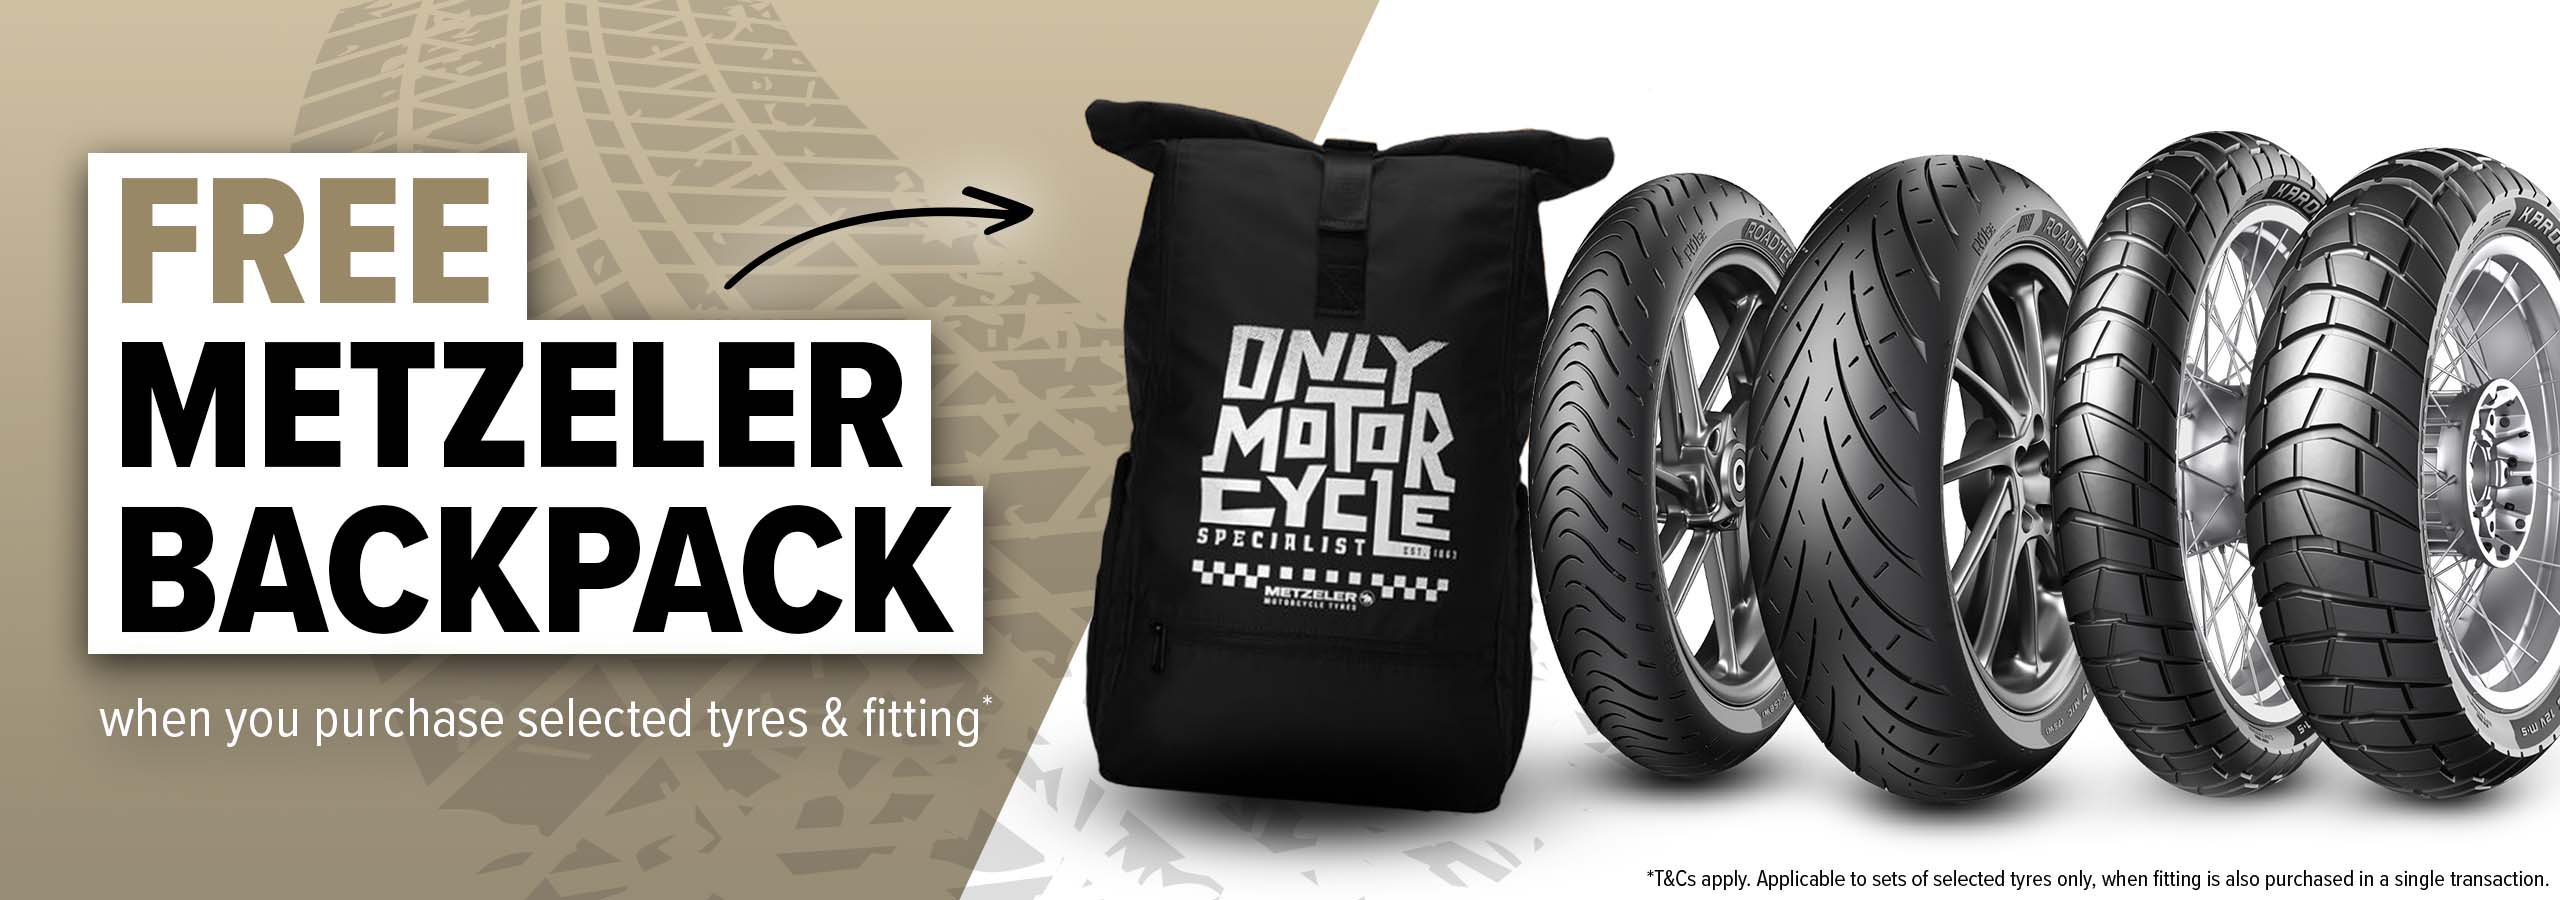 Enjoy a free Metzeler Backpack with selected tyres and fitting at Laguna Motorcycles in Maidstone and Ashford